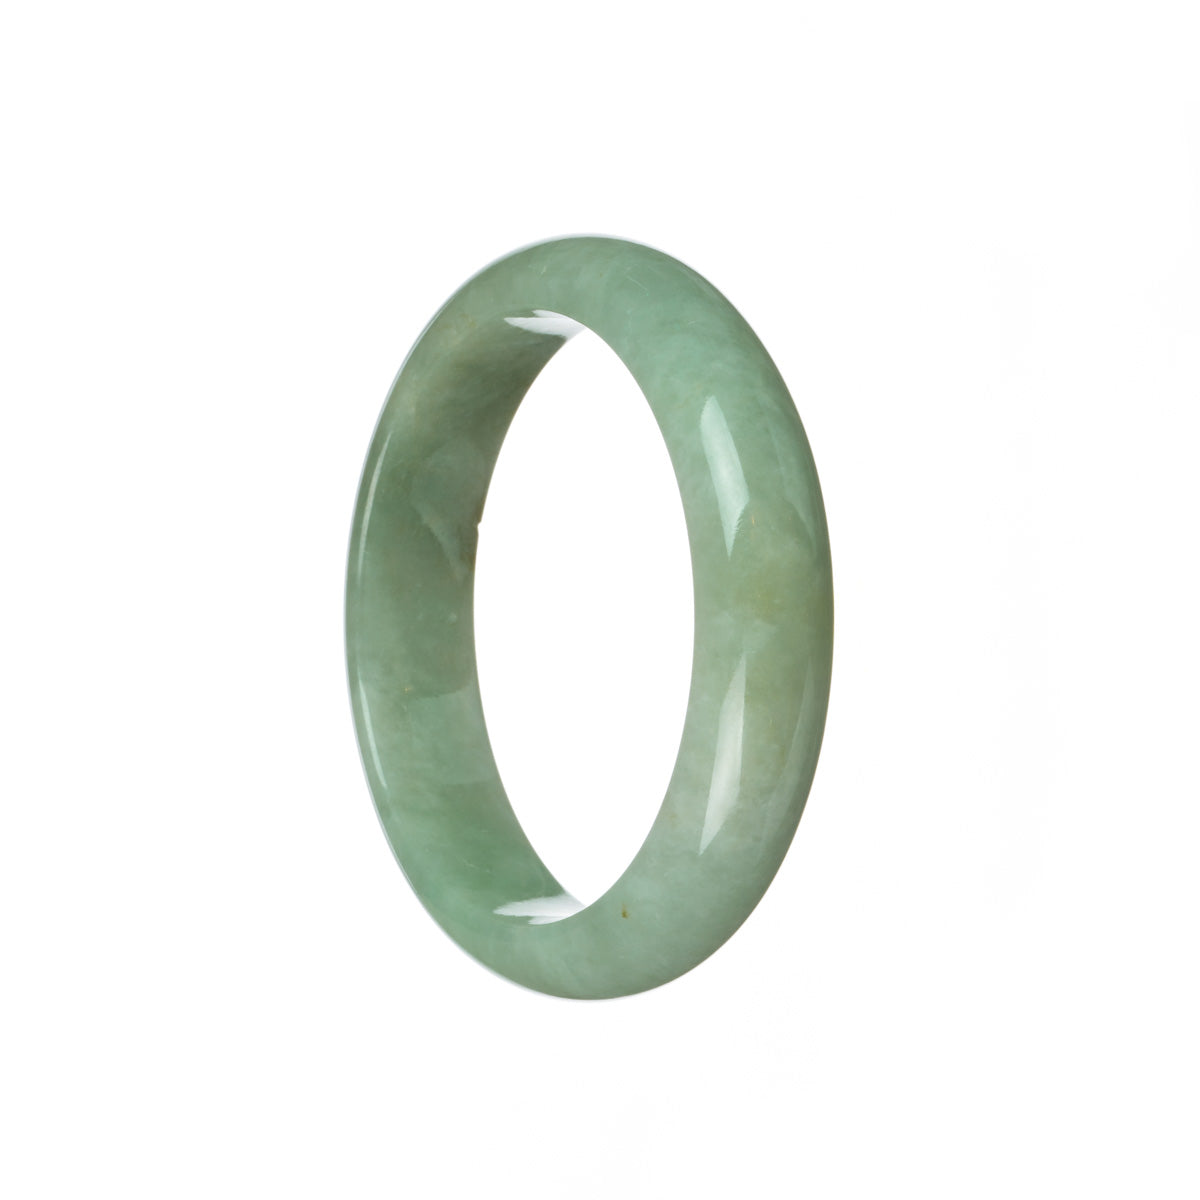 A beautiful half moon shaped bracelet made of genuine natural light green Burmese jade, measuring 58mm in size. Perfect for adding a touch of elegance to any outfit.